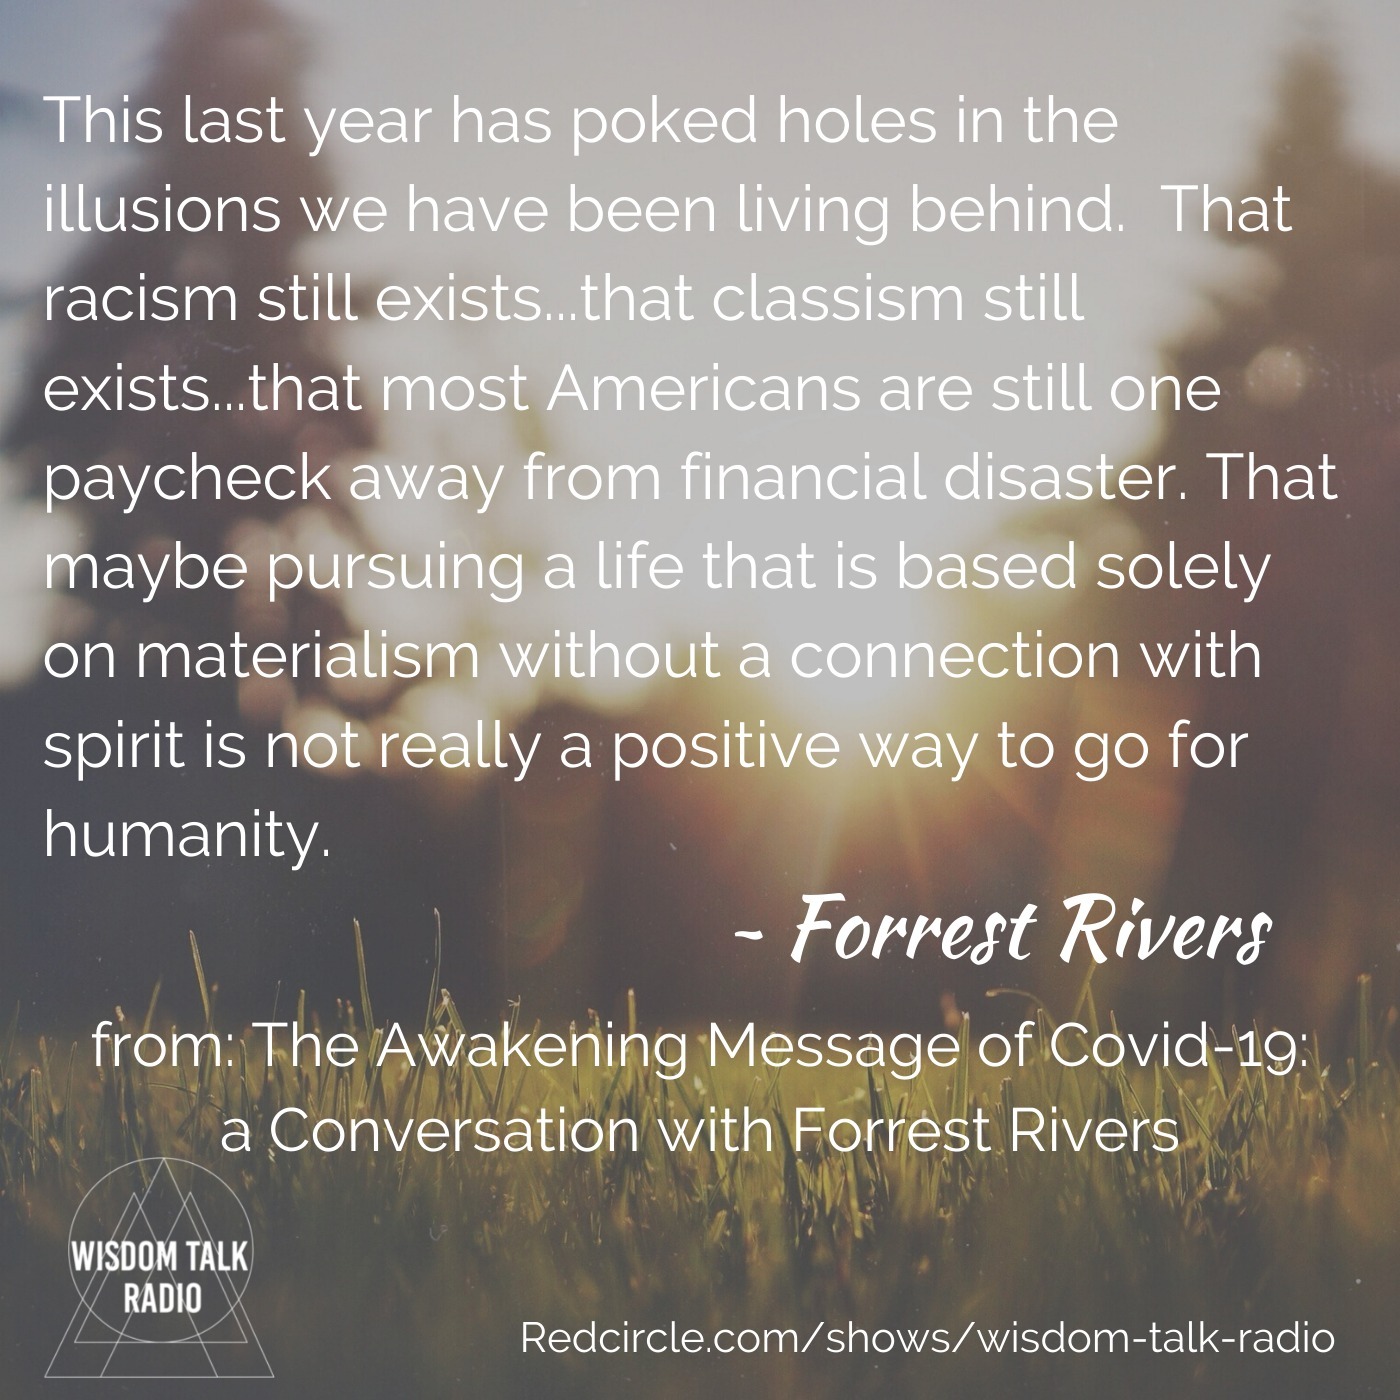 The Awakening Message of Covid-19: a Conversation with Forrest Rivers